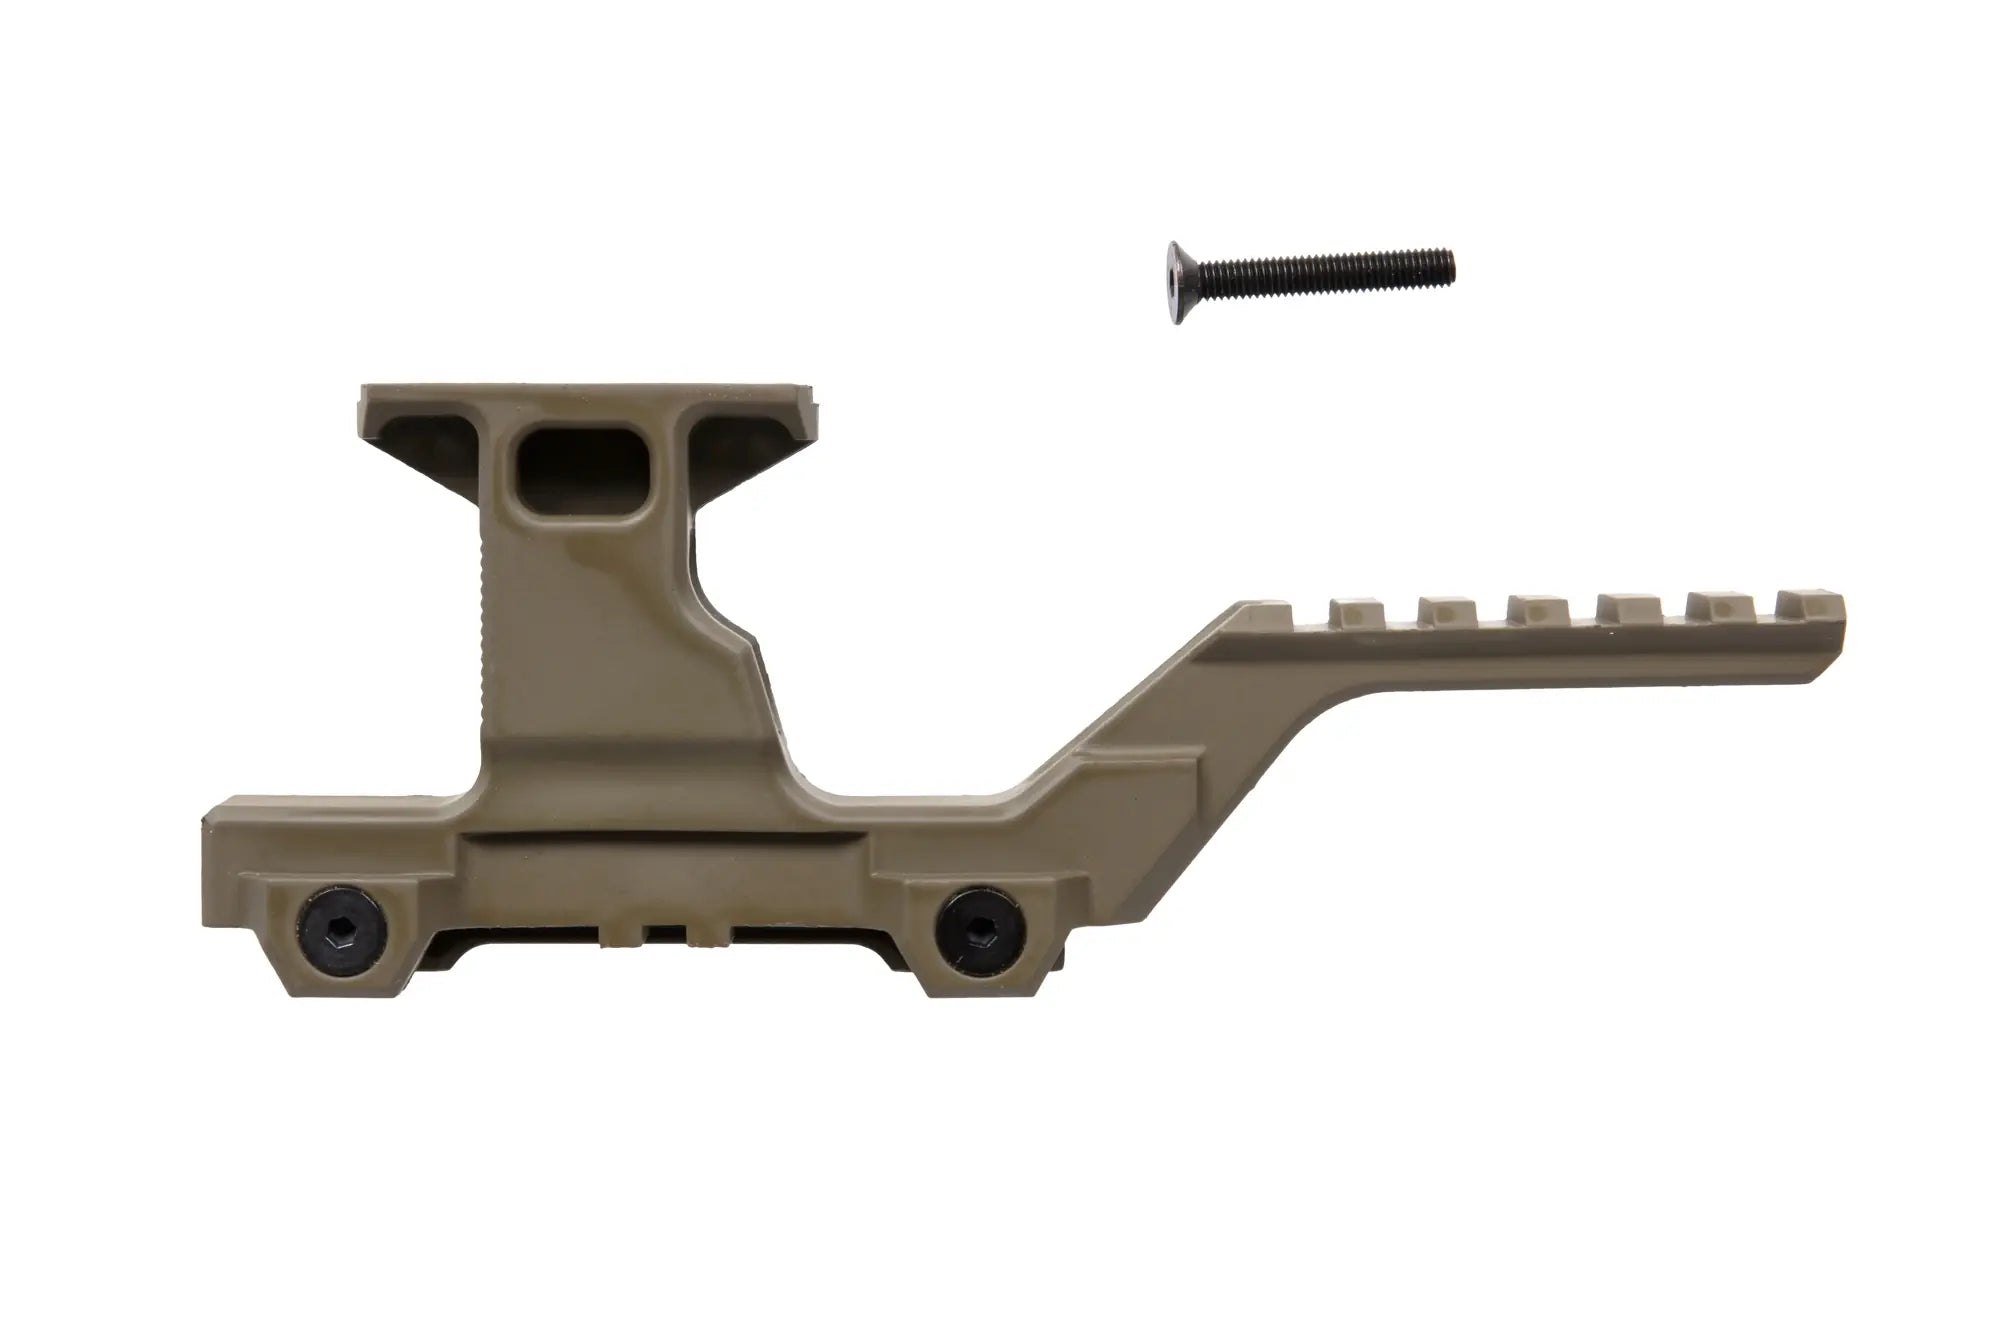 High mount for T1/T2 and PEQ Primal Gear Tan collimators-1